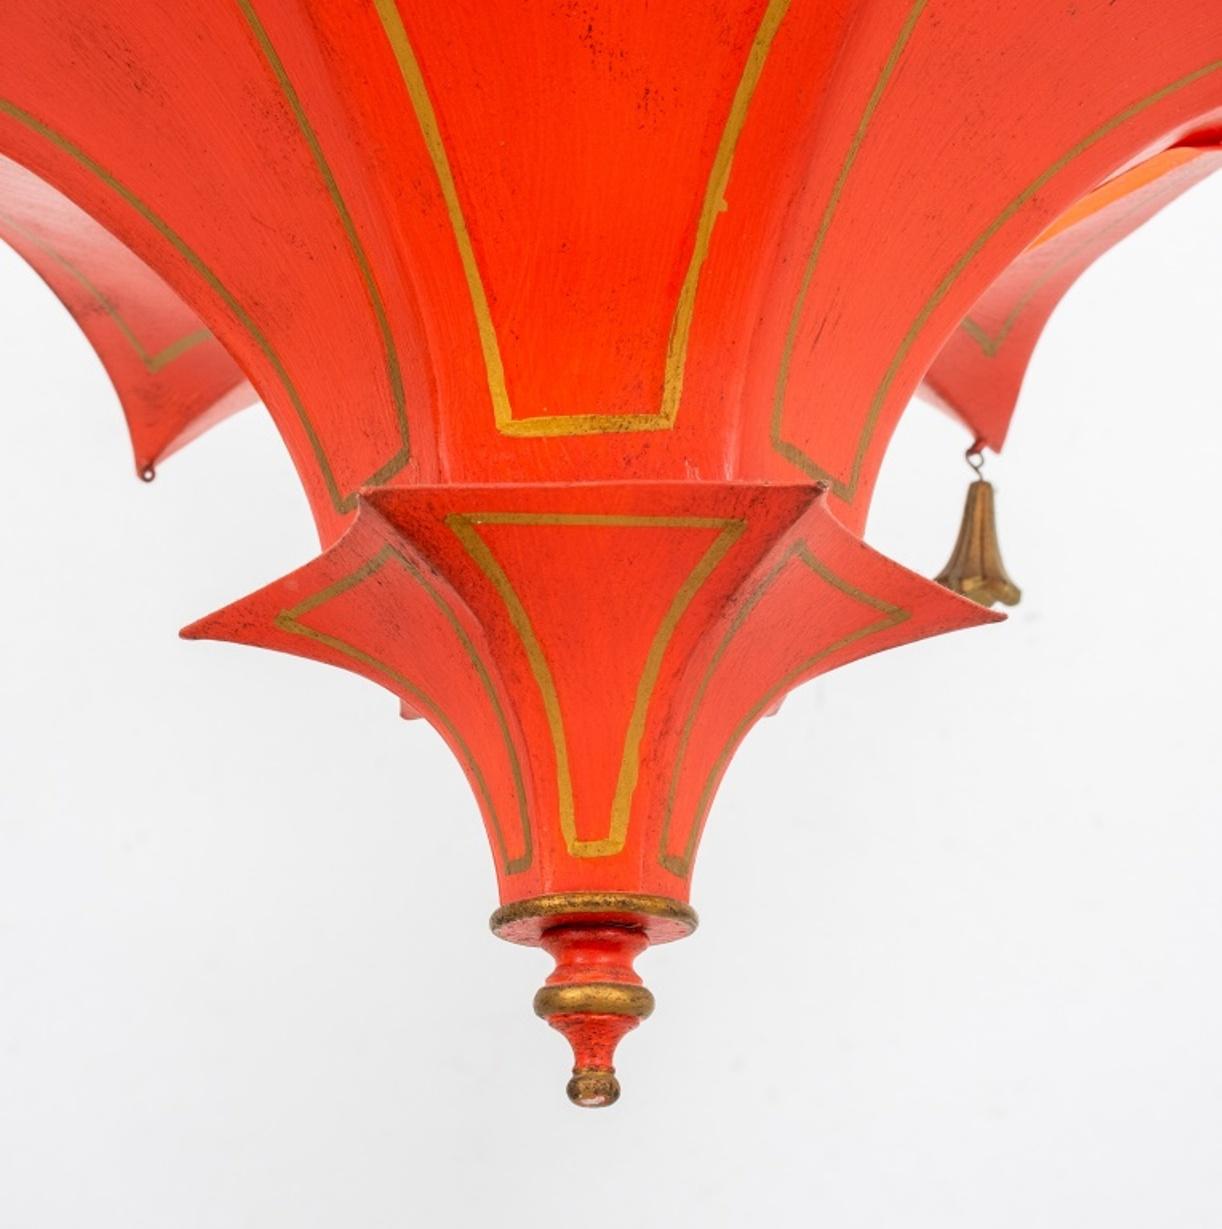 John Rosselli Chinoiserie pagoda pendant uplight in the form of an inverted two-tiered tiered pagoda roof, decorated in coral red with gilt decoration, with pendant tassels (one lacking).

Dimensions: 16